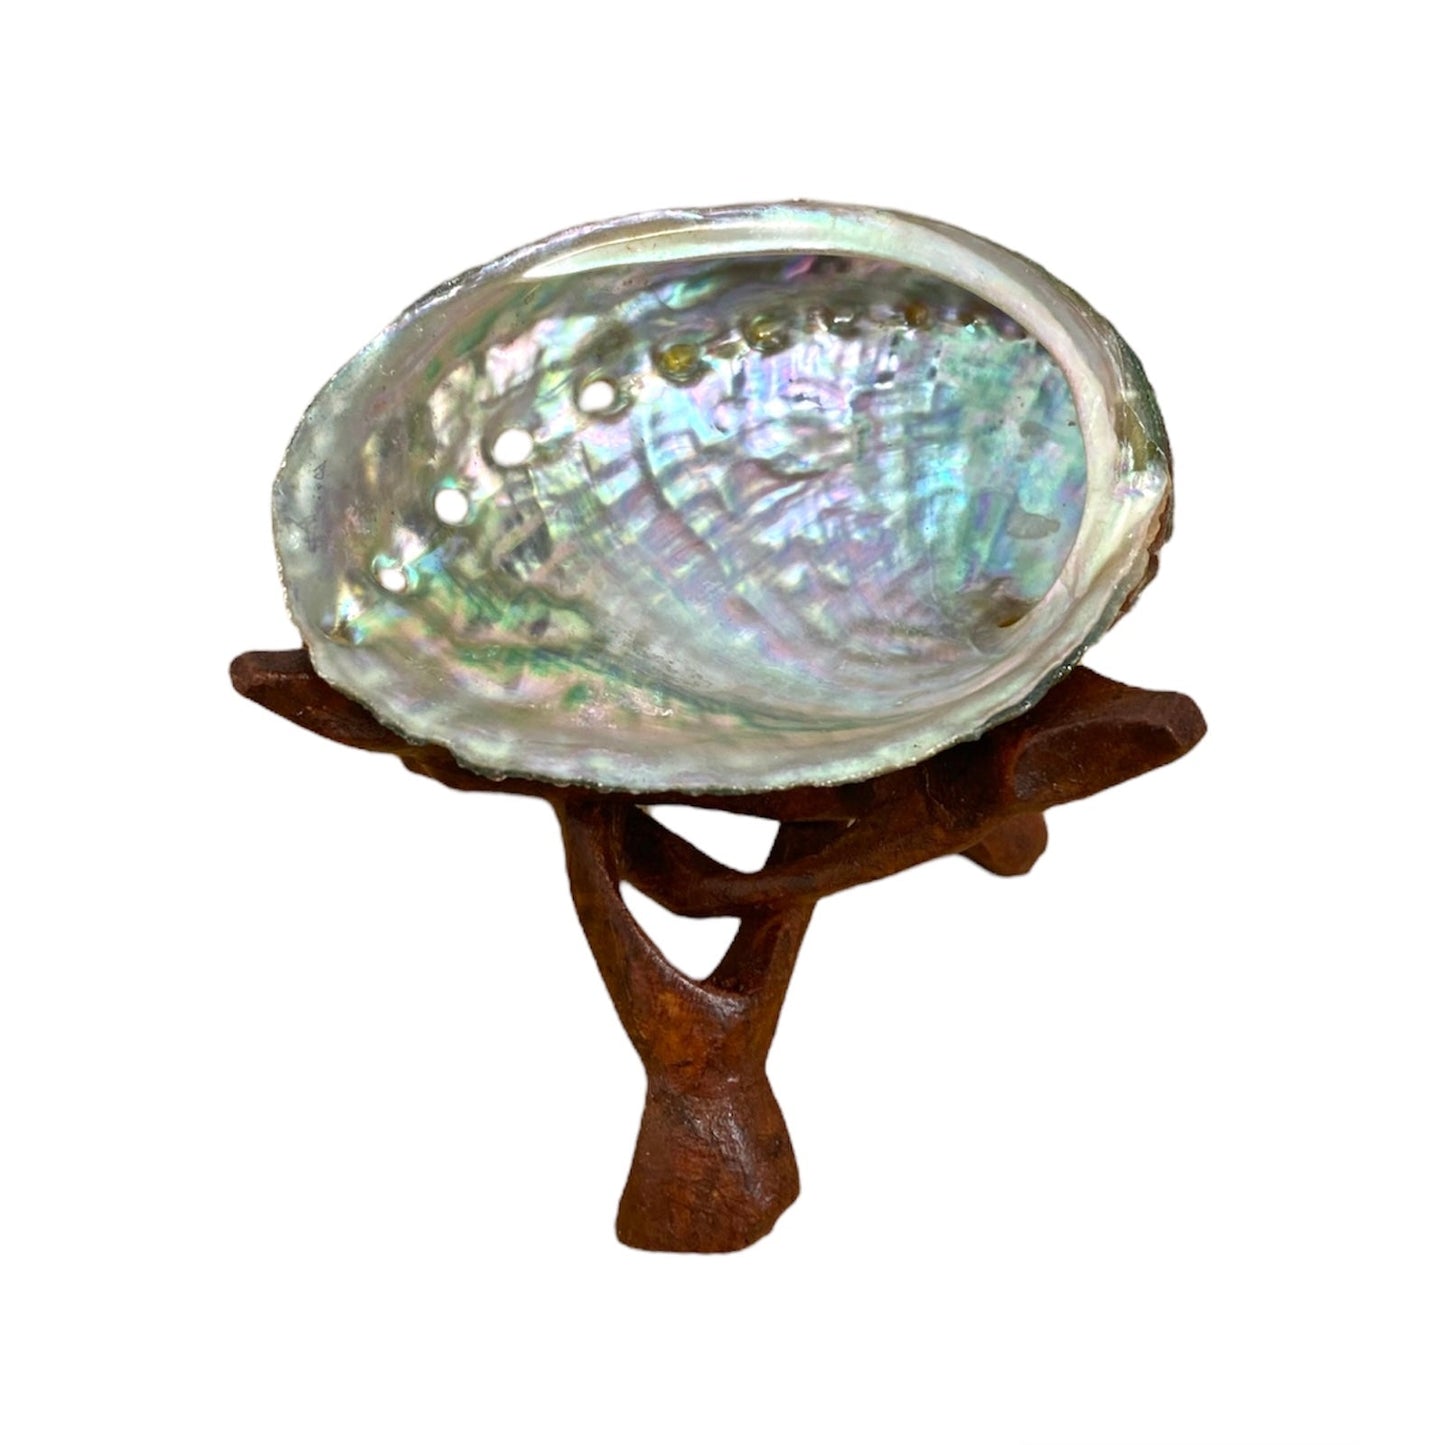 NessaStores 6 Abalone Shells 2.5 to 3.5 Inches | Beautiful All Natural Smudge Bowl - Perfect for Smudge Sticks, Incense Sticks and a Sage Smudge Kit. #JC-020